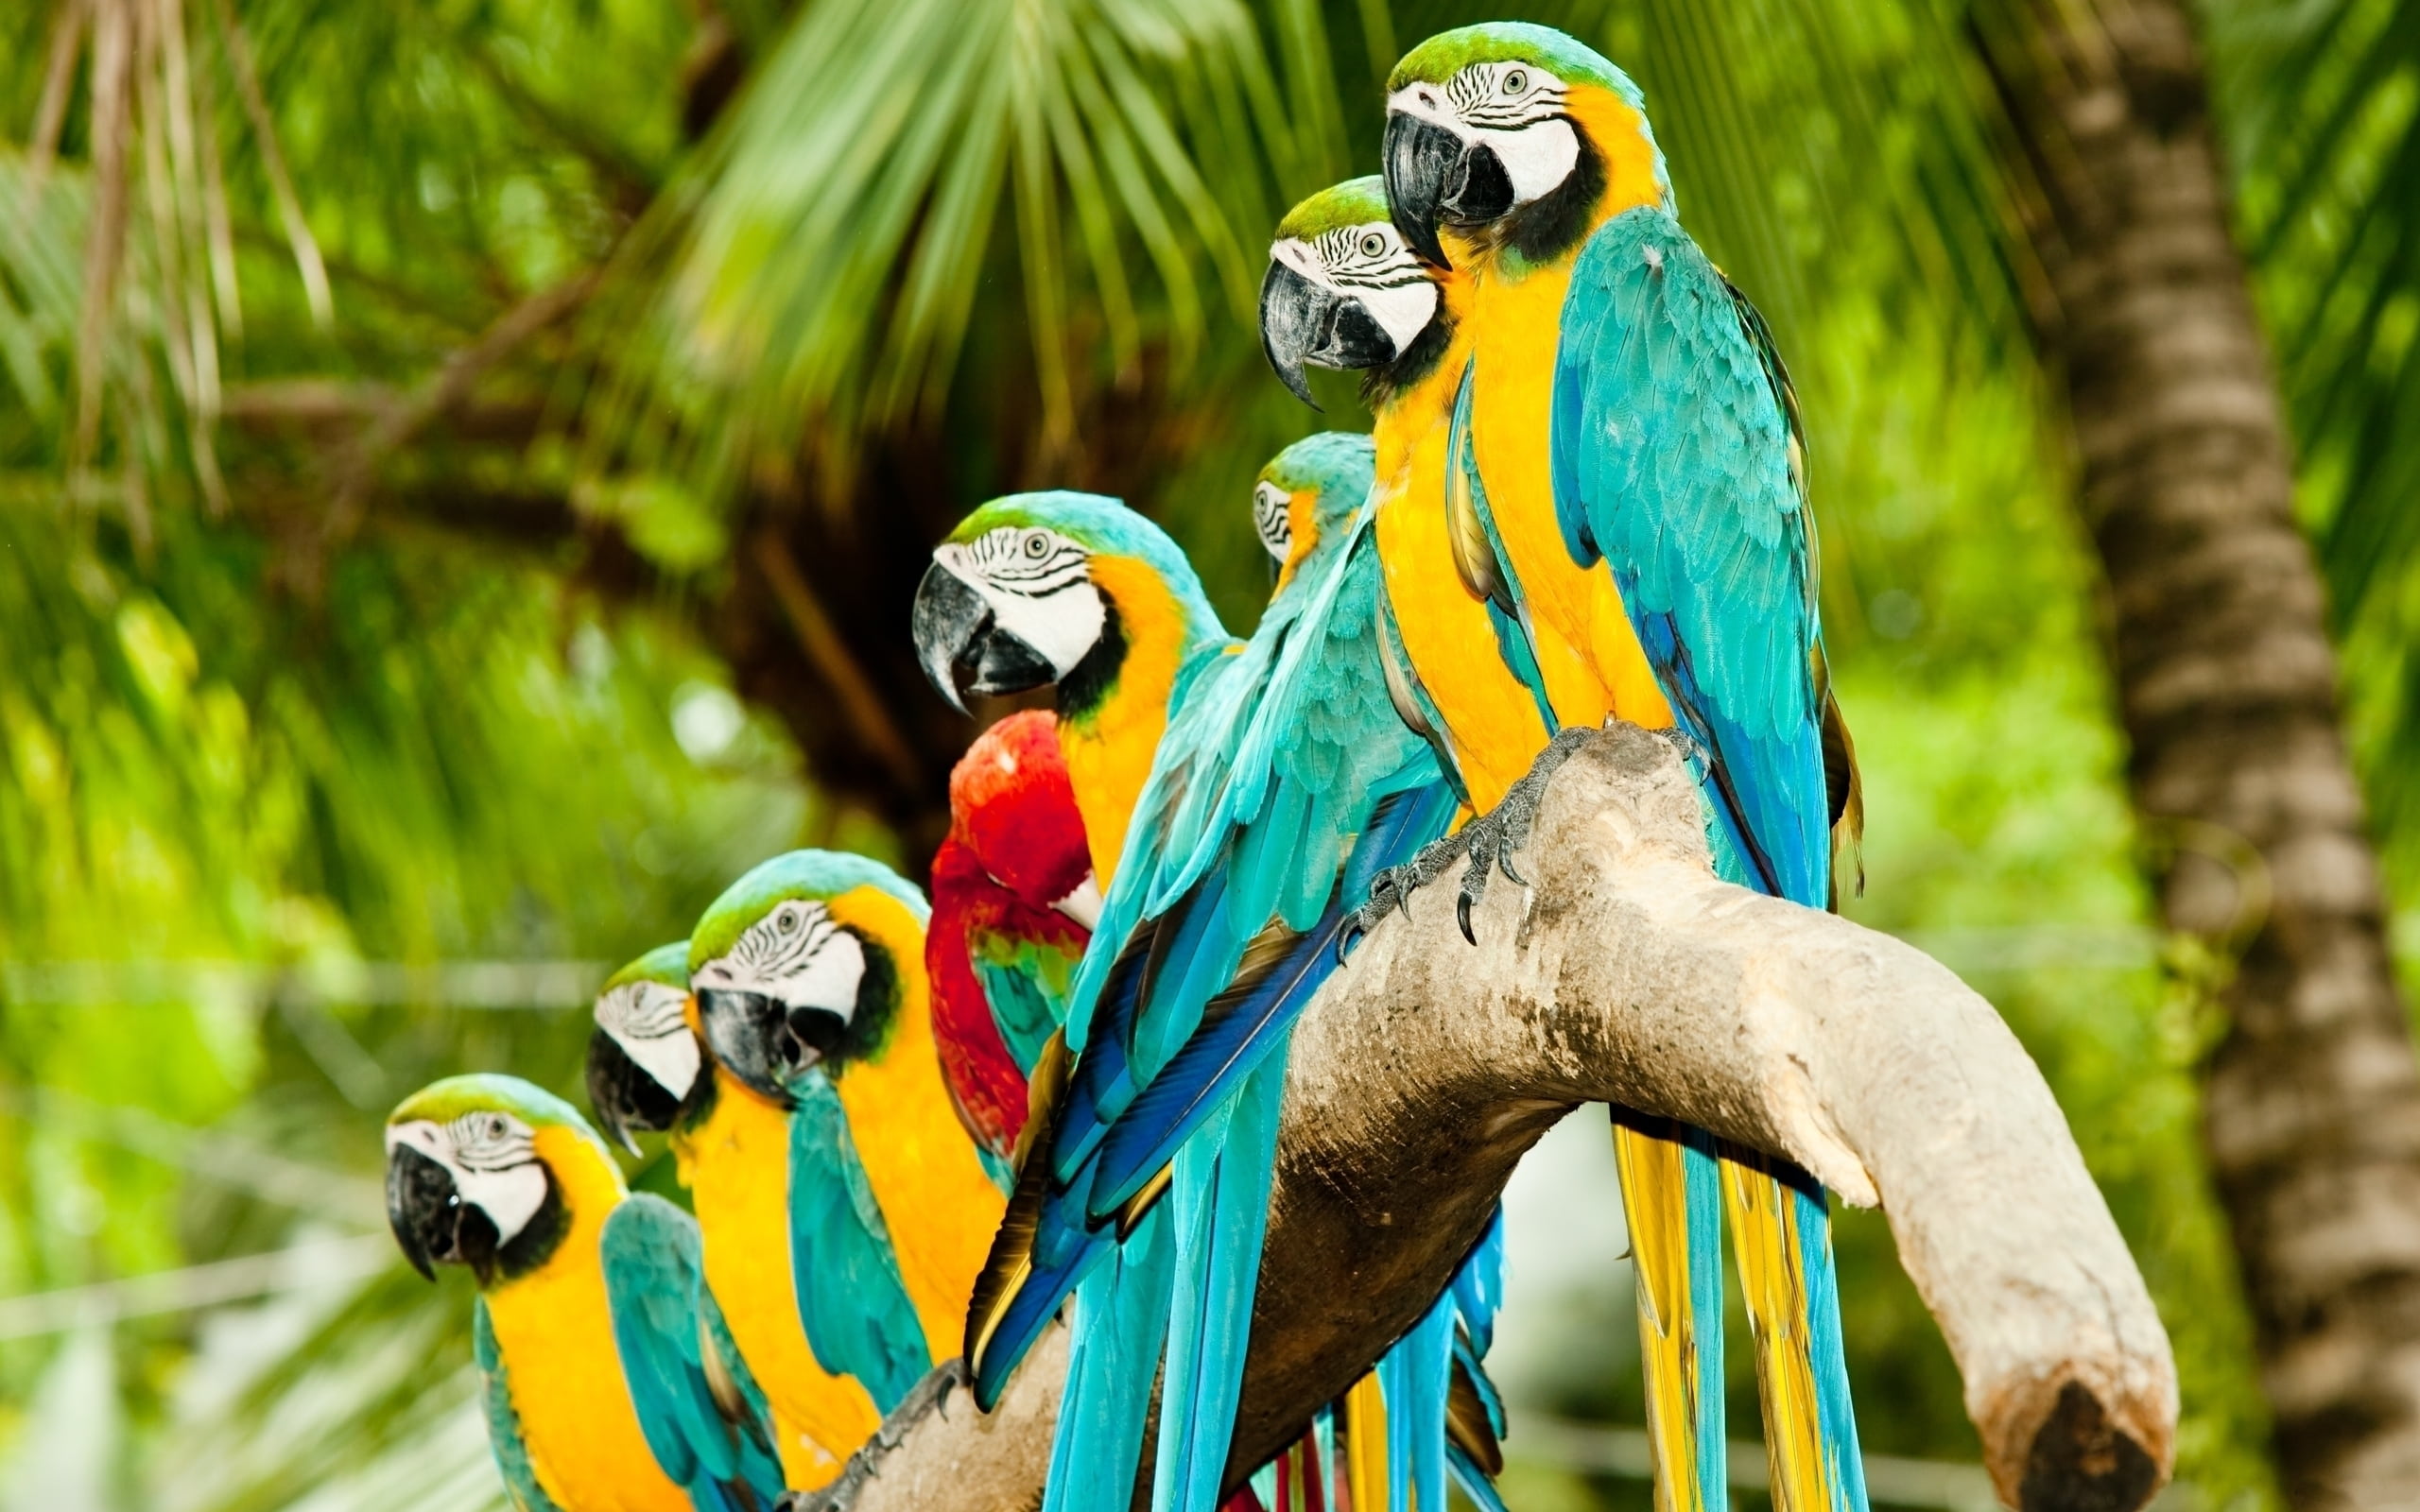 Macaws perched on a branch